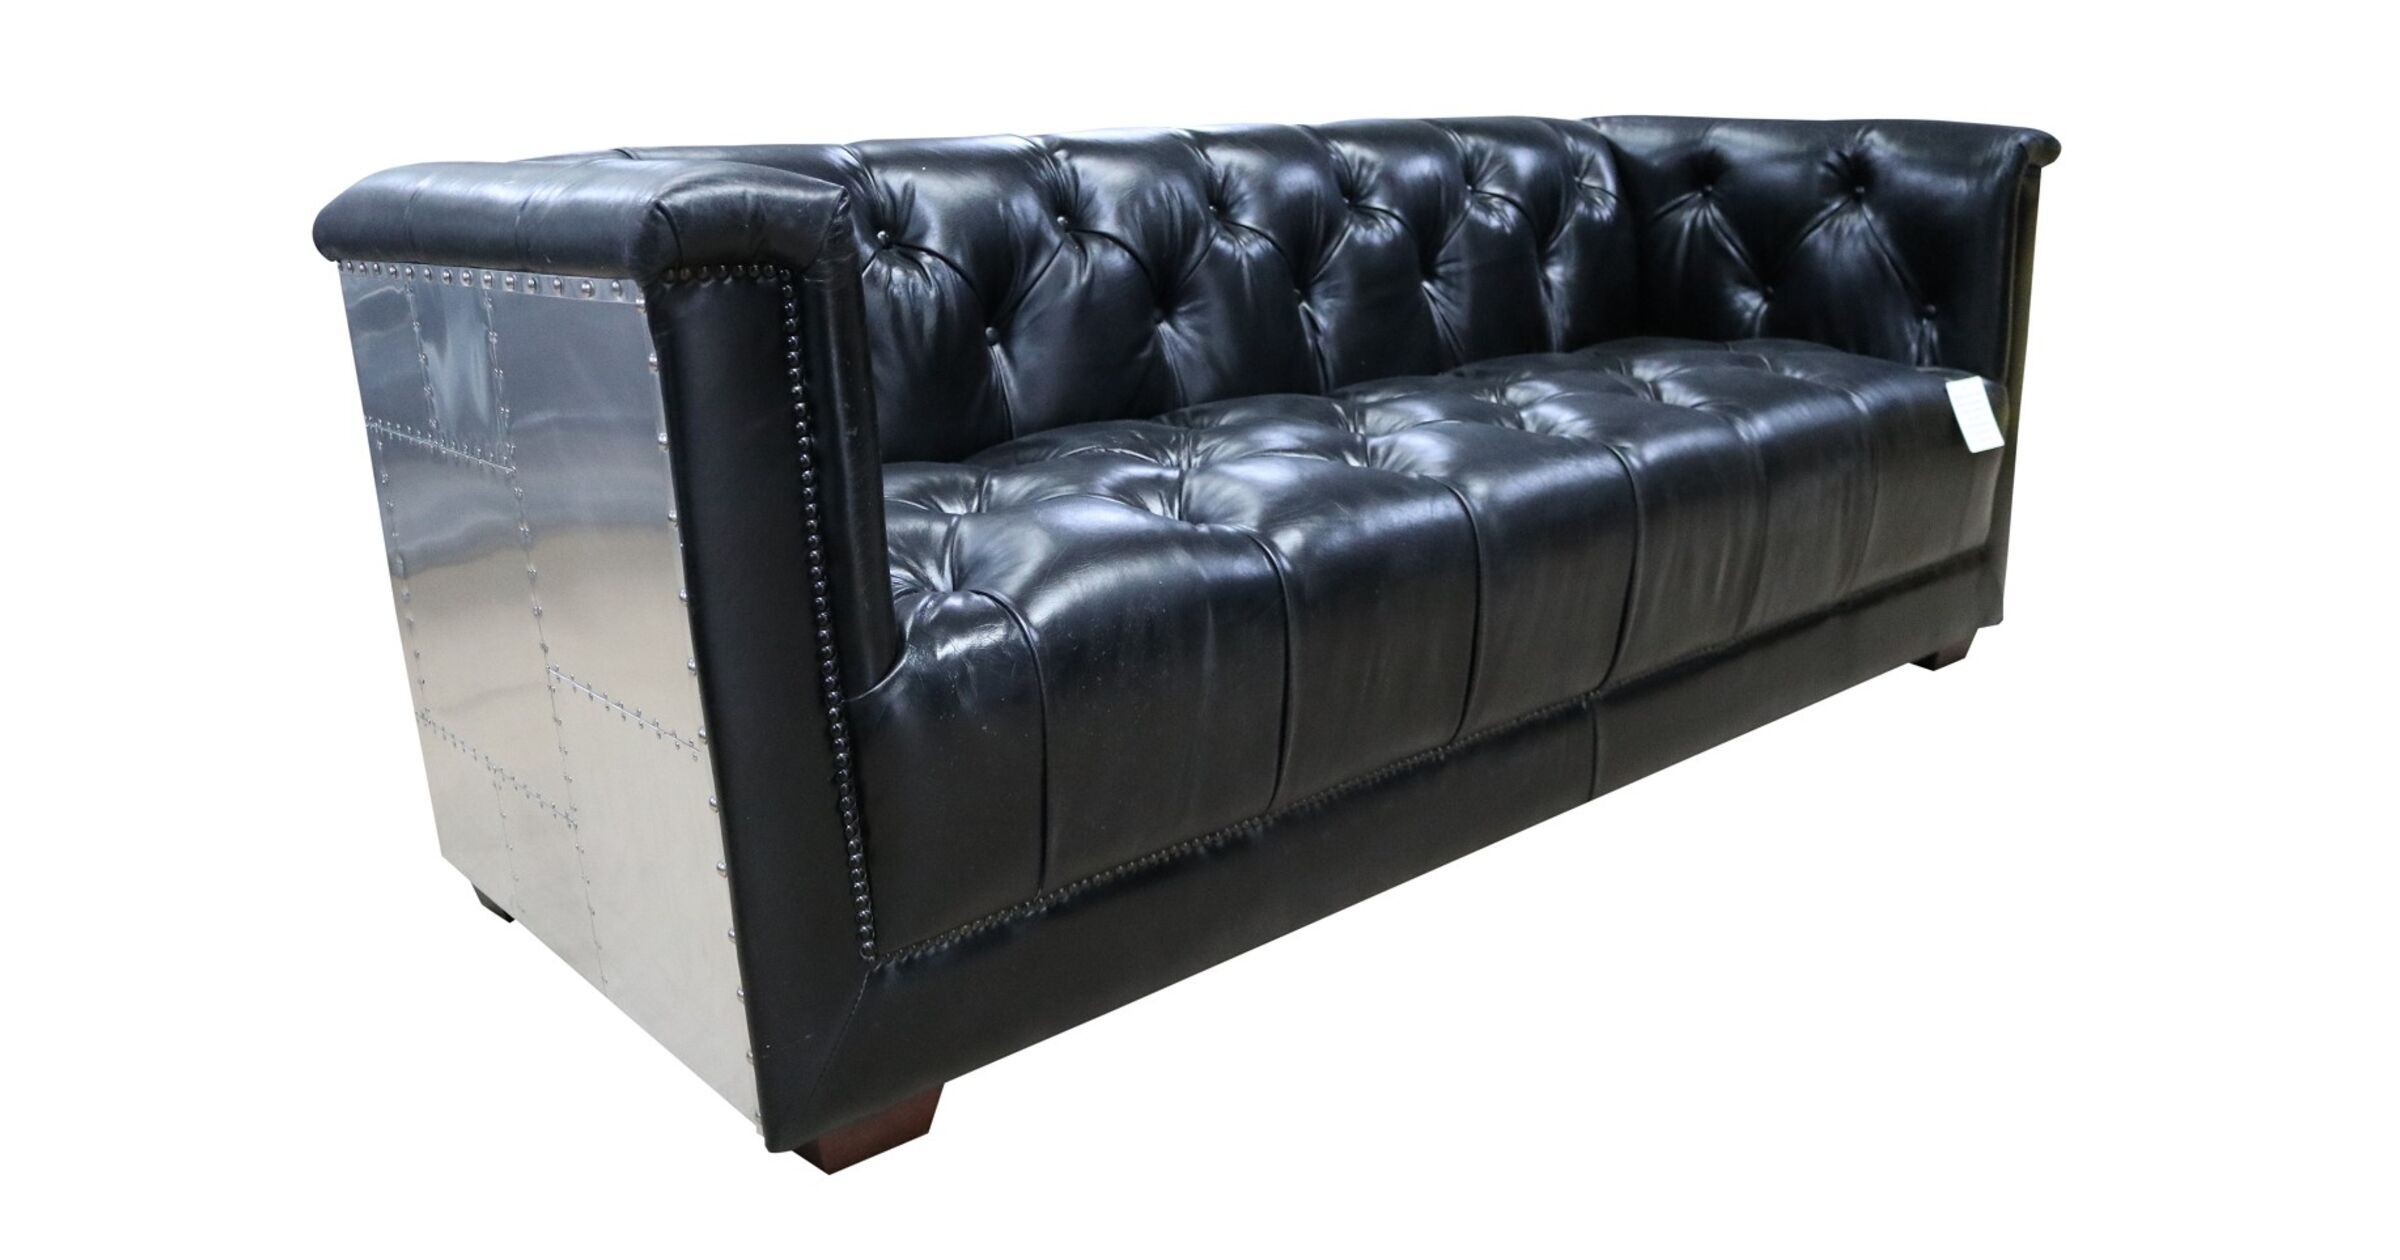 spitfire 3 seater sofa bed